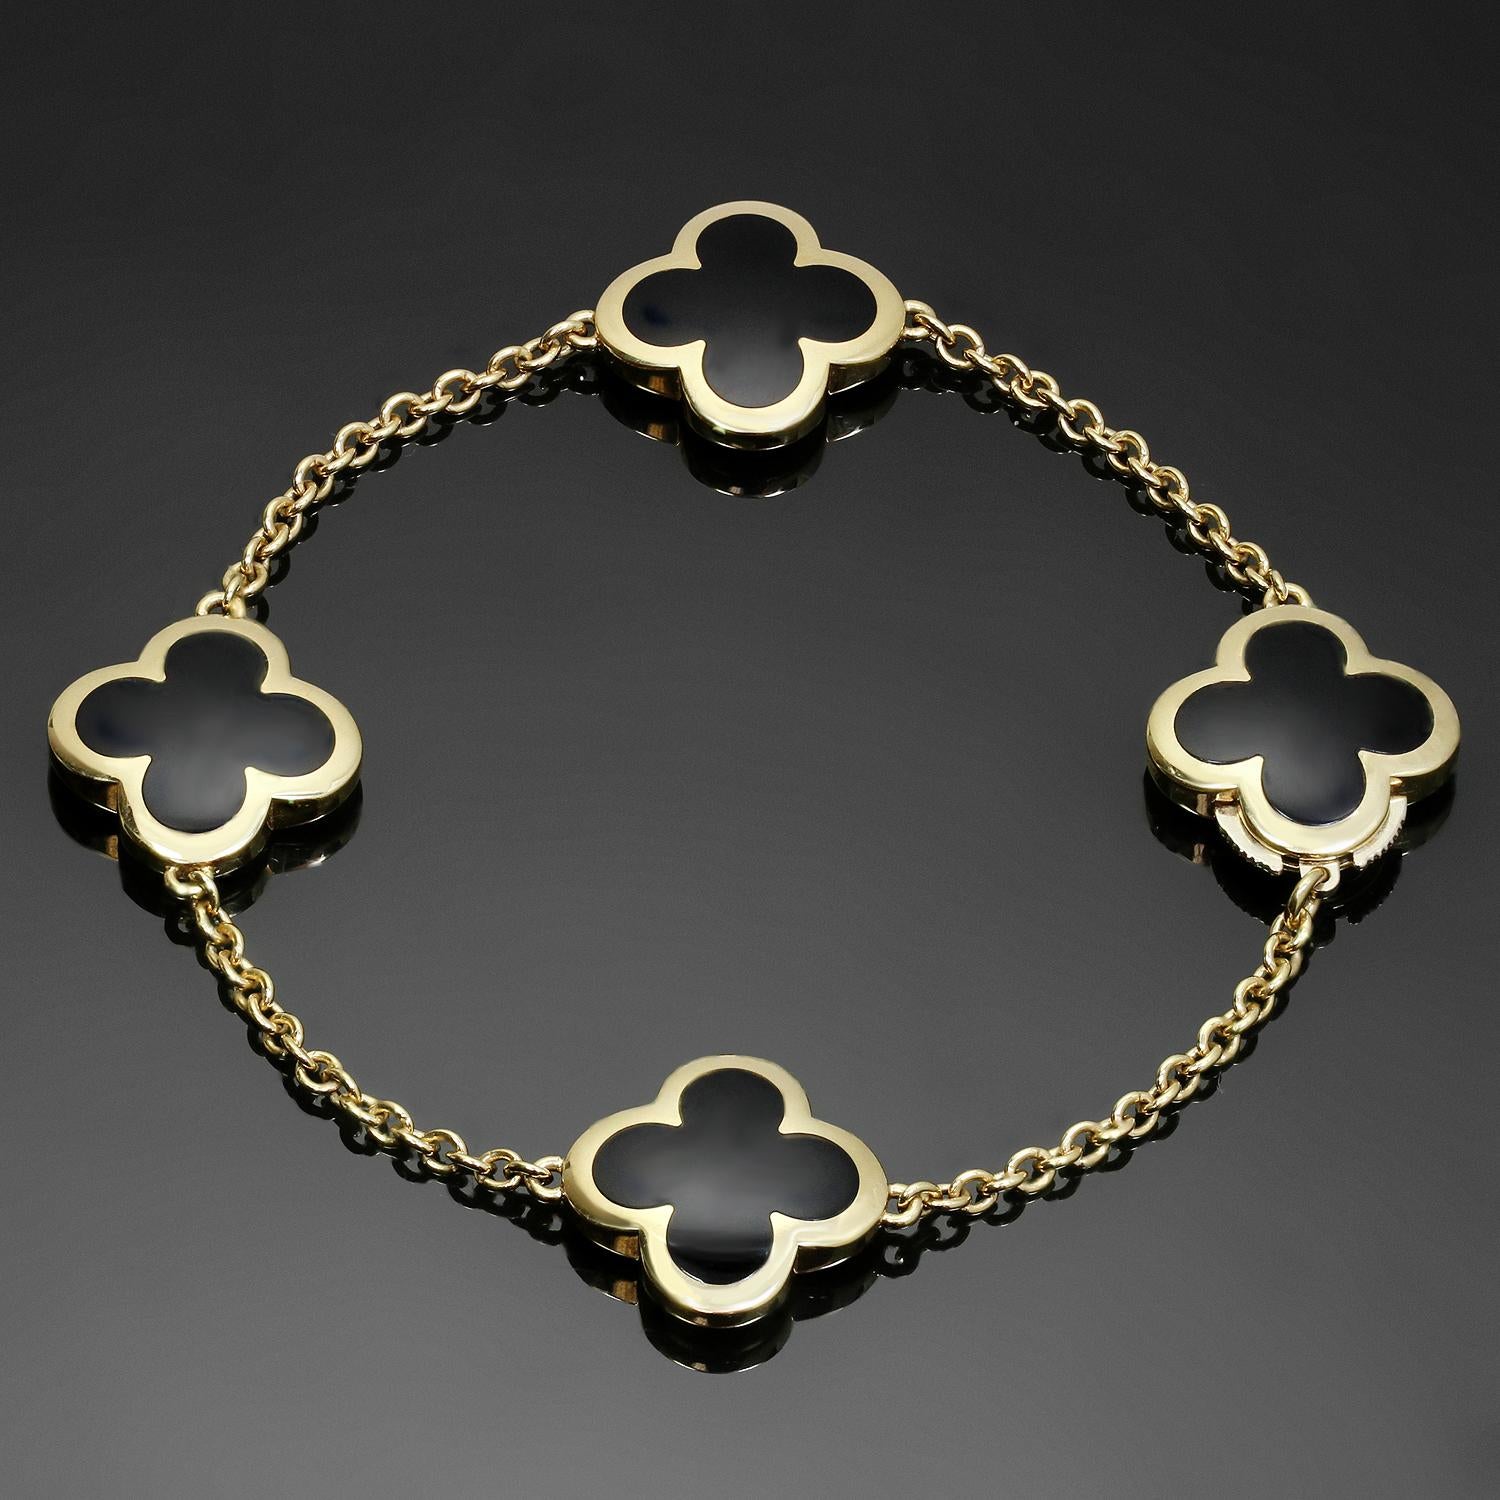 This classic Van Cleef & Arpels bracelet from the iconic Pure Alhambra collection is crafted in 18k yellow gold and features 4 lucky clover motifs inlaid with black onyx. Completed with an invisible clasp. Made in France circa 2010s. Measurements: